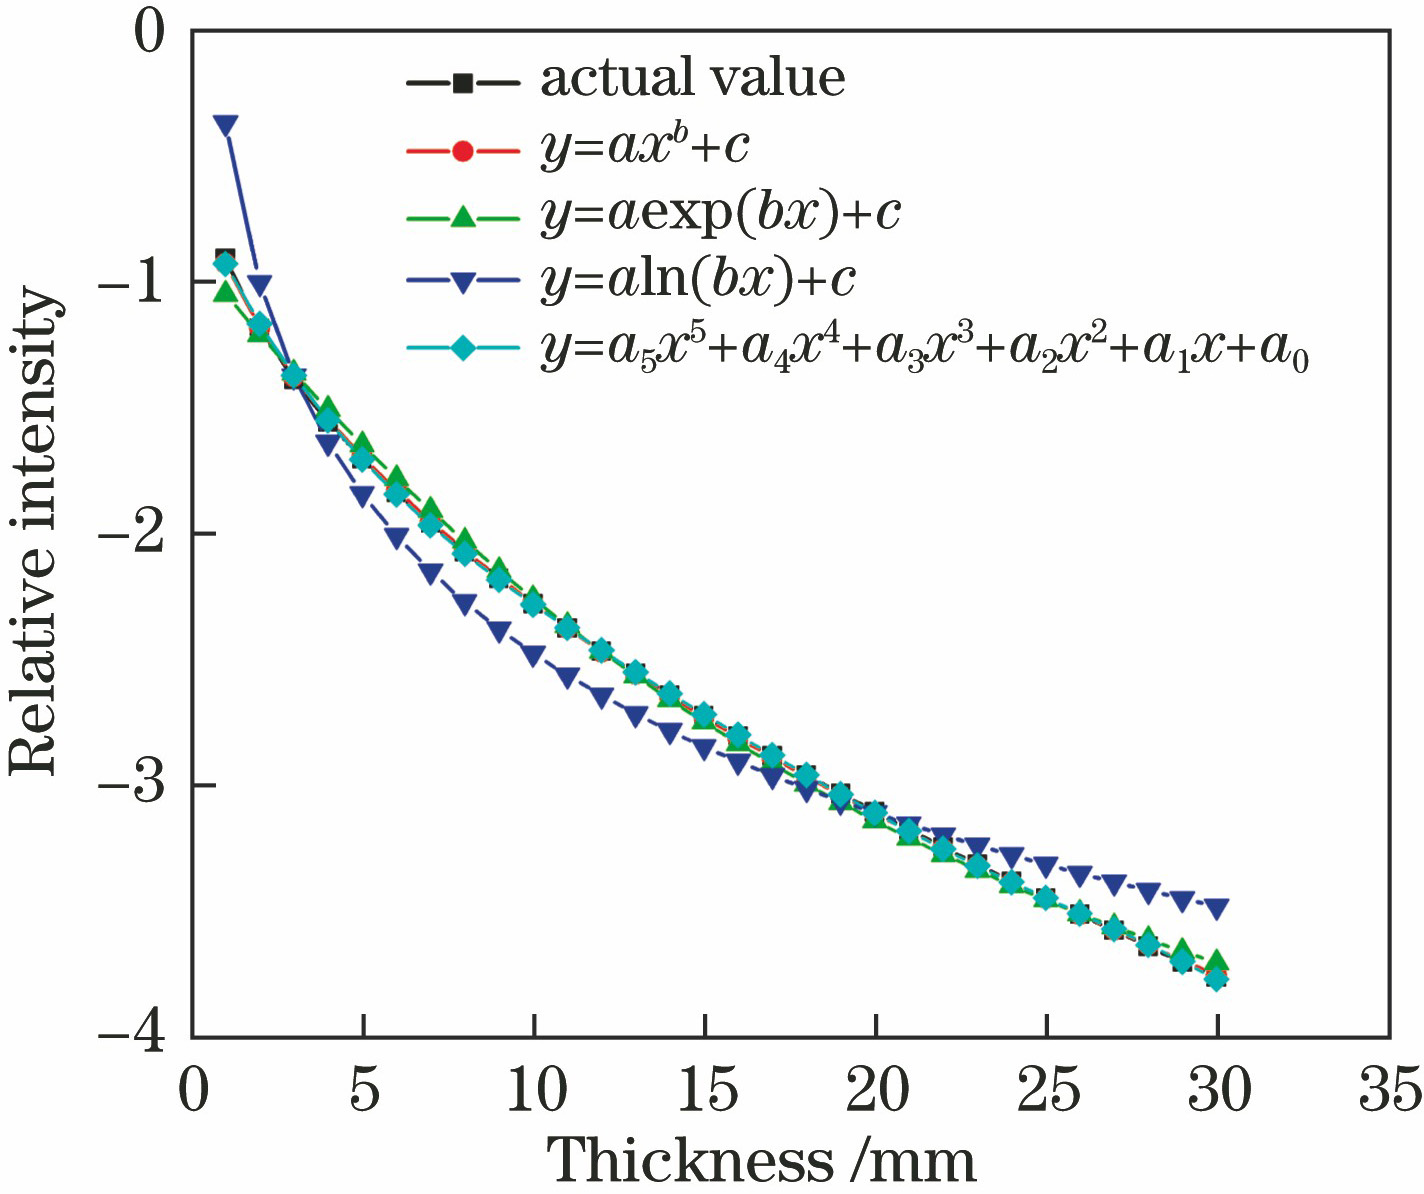 Fitting results of penetrated thickness-relative intensity with different models